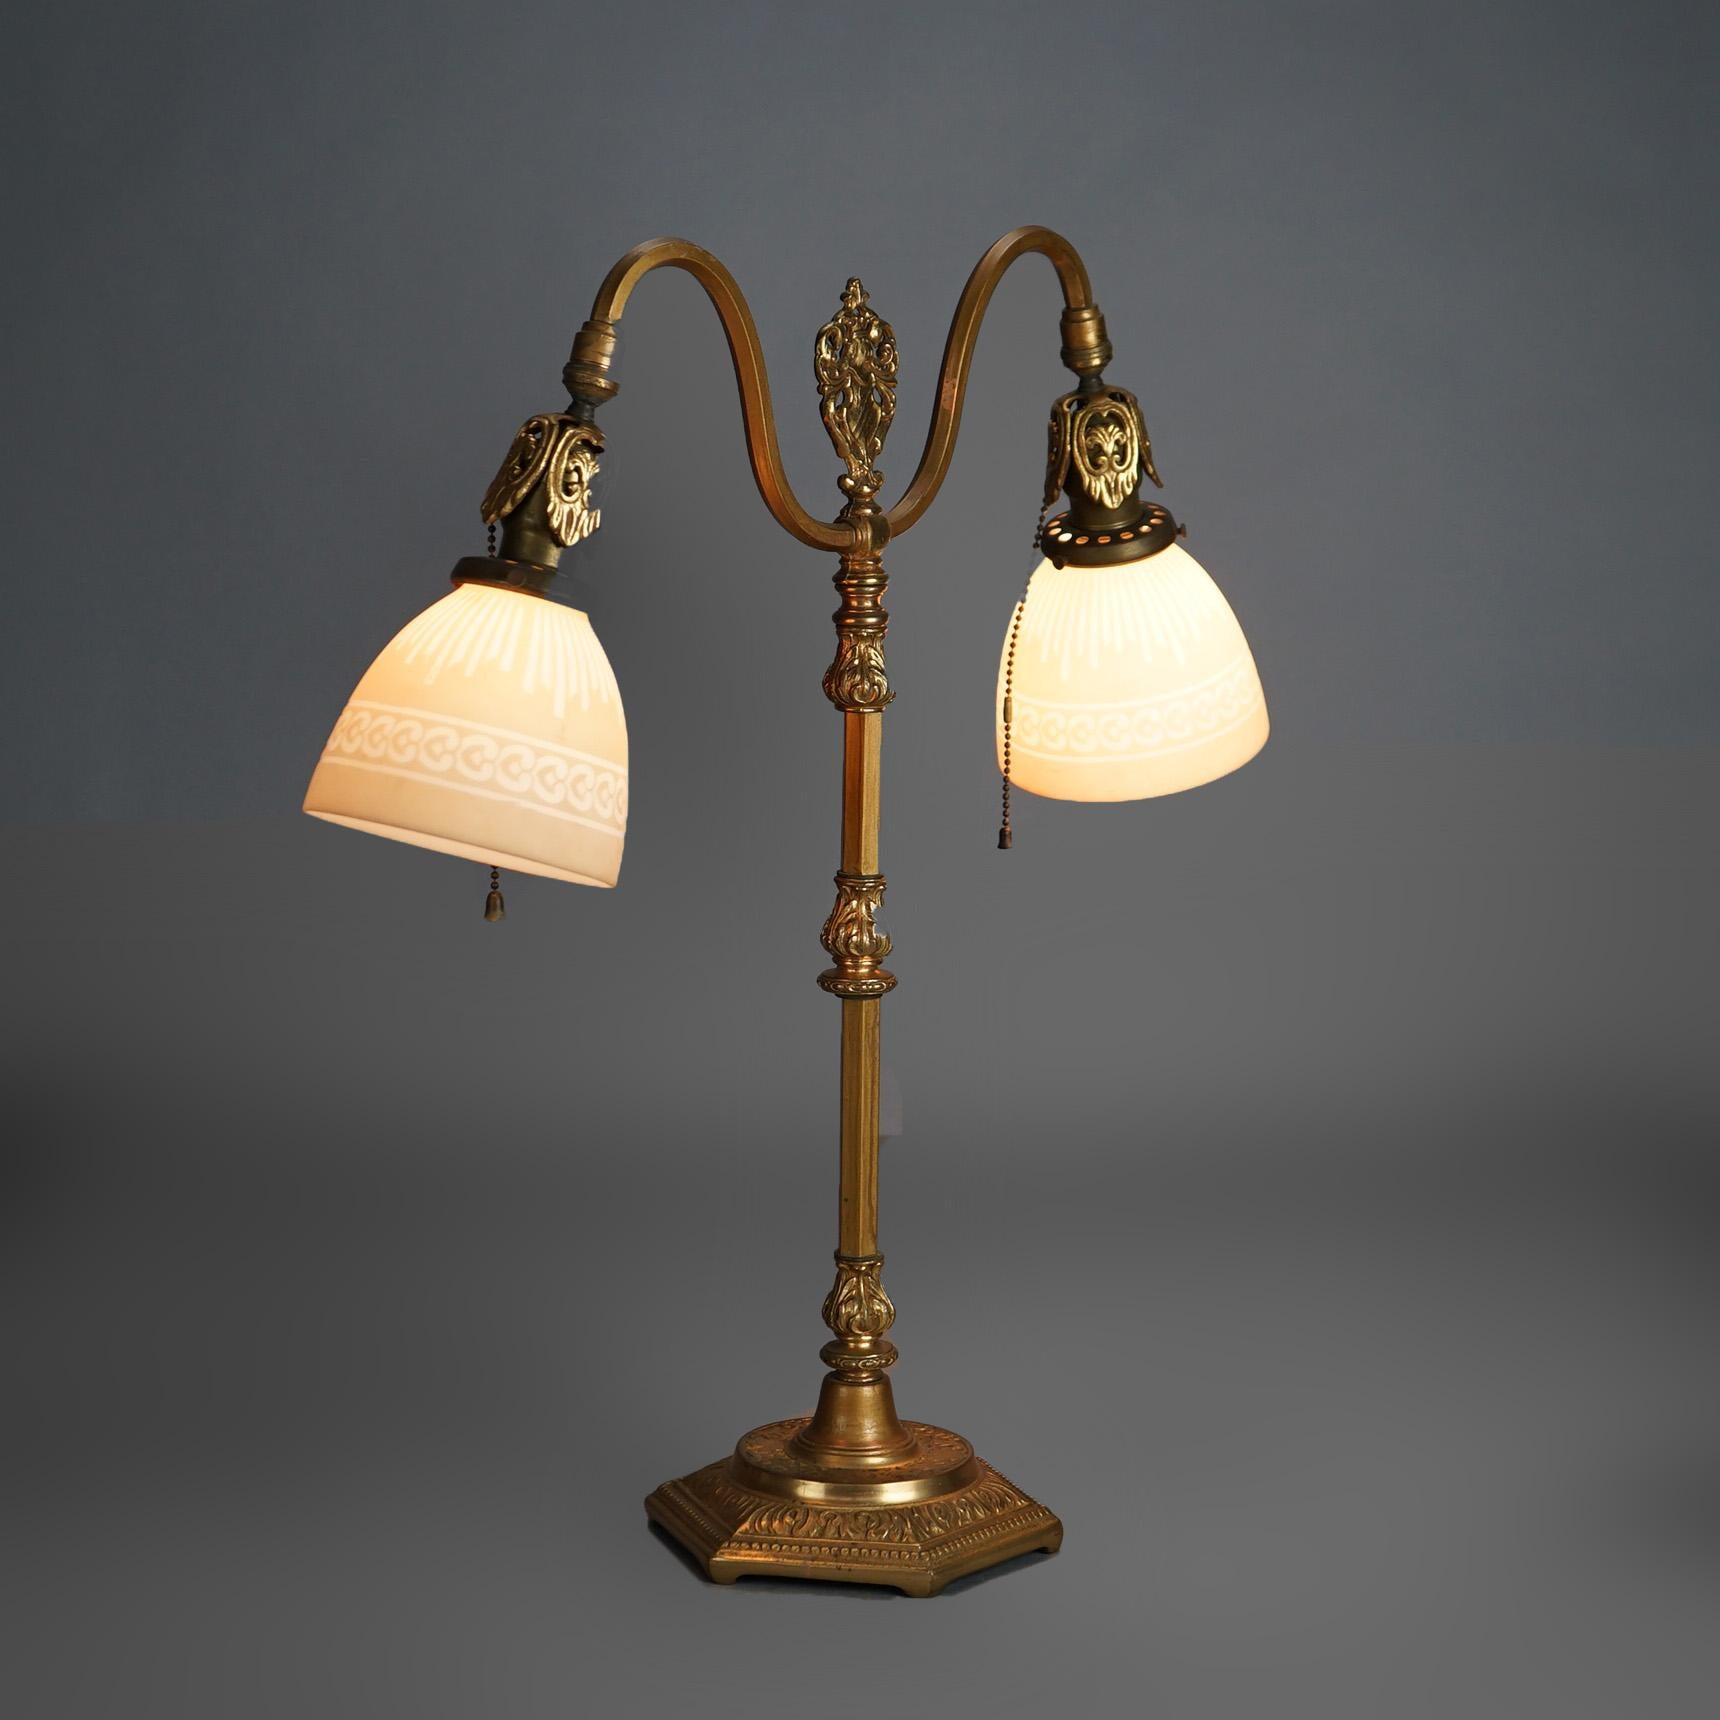 American Antique Rembrandt Two-Light Foliate Embossed Brass Table Lamp Circa 1920